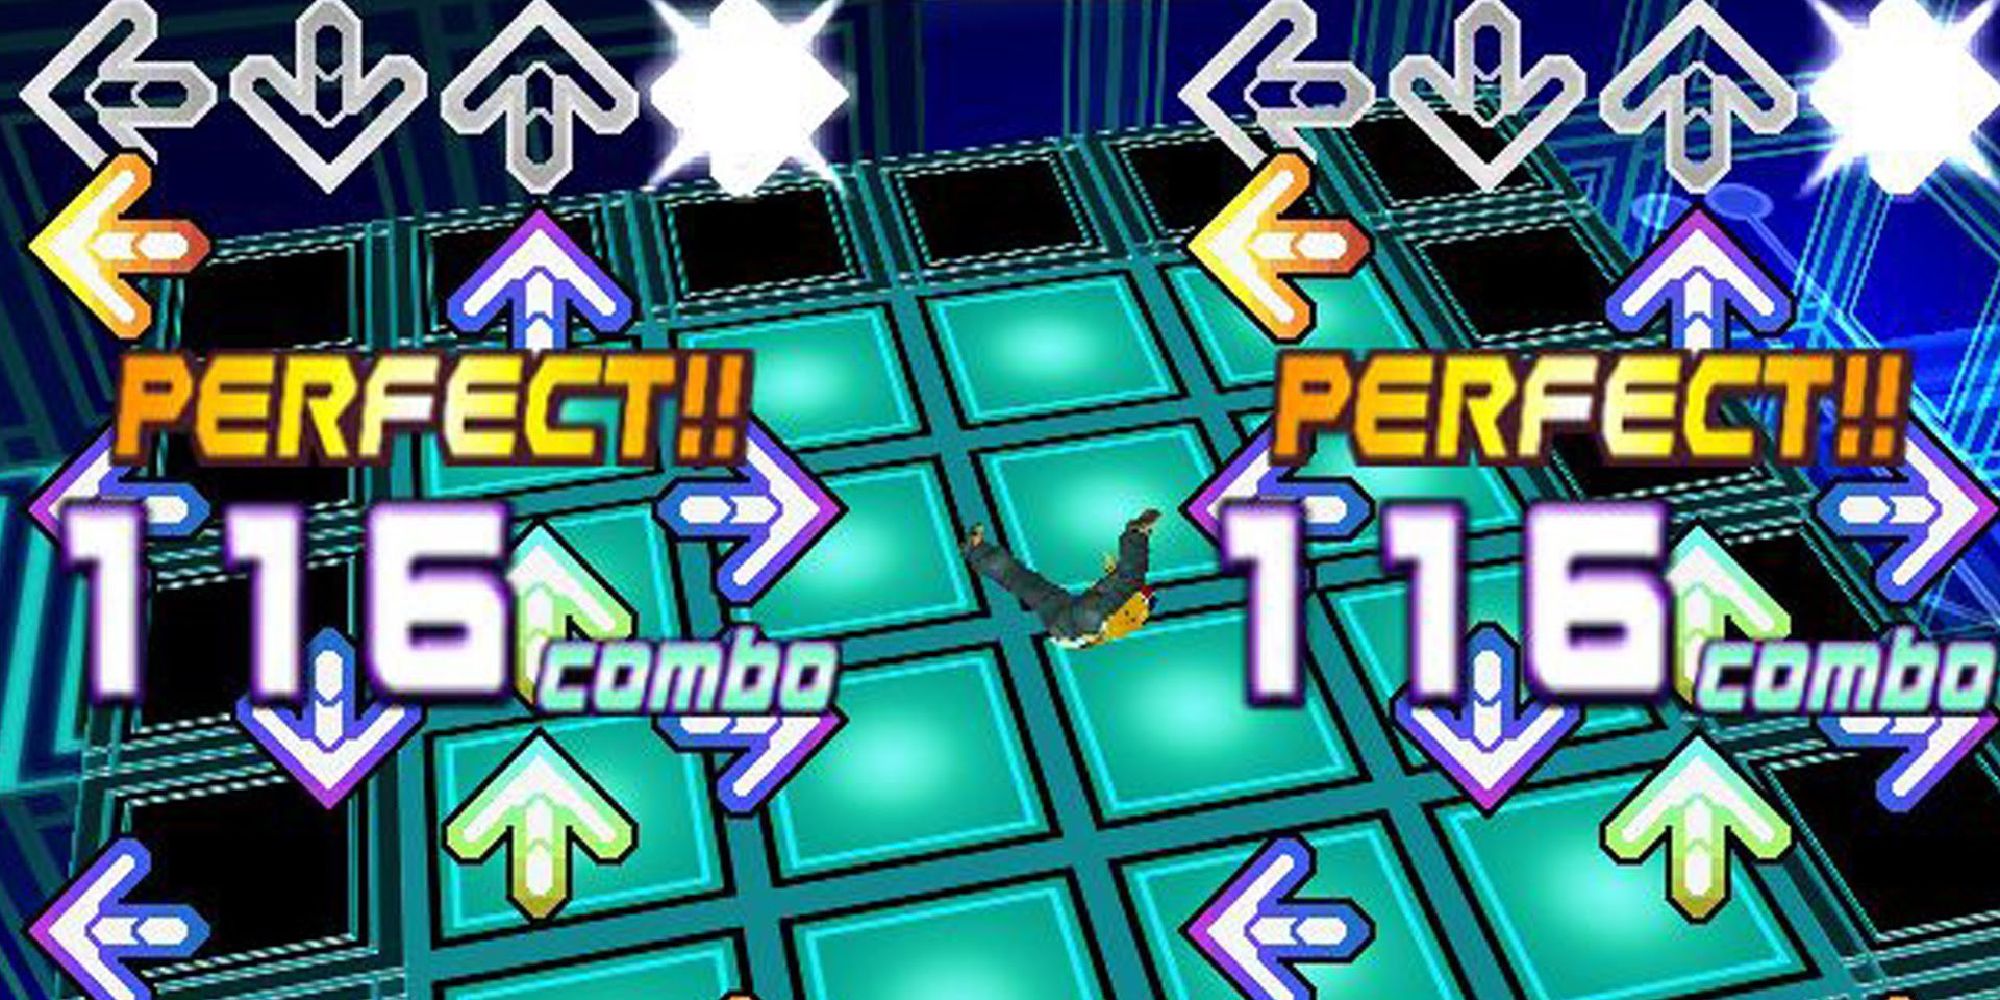 A screen showing gameplay of Dance Dance Revolution